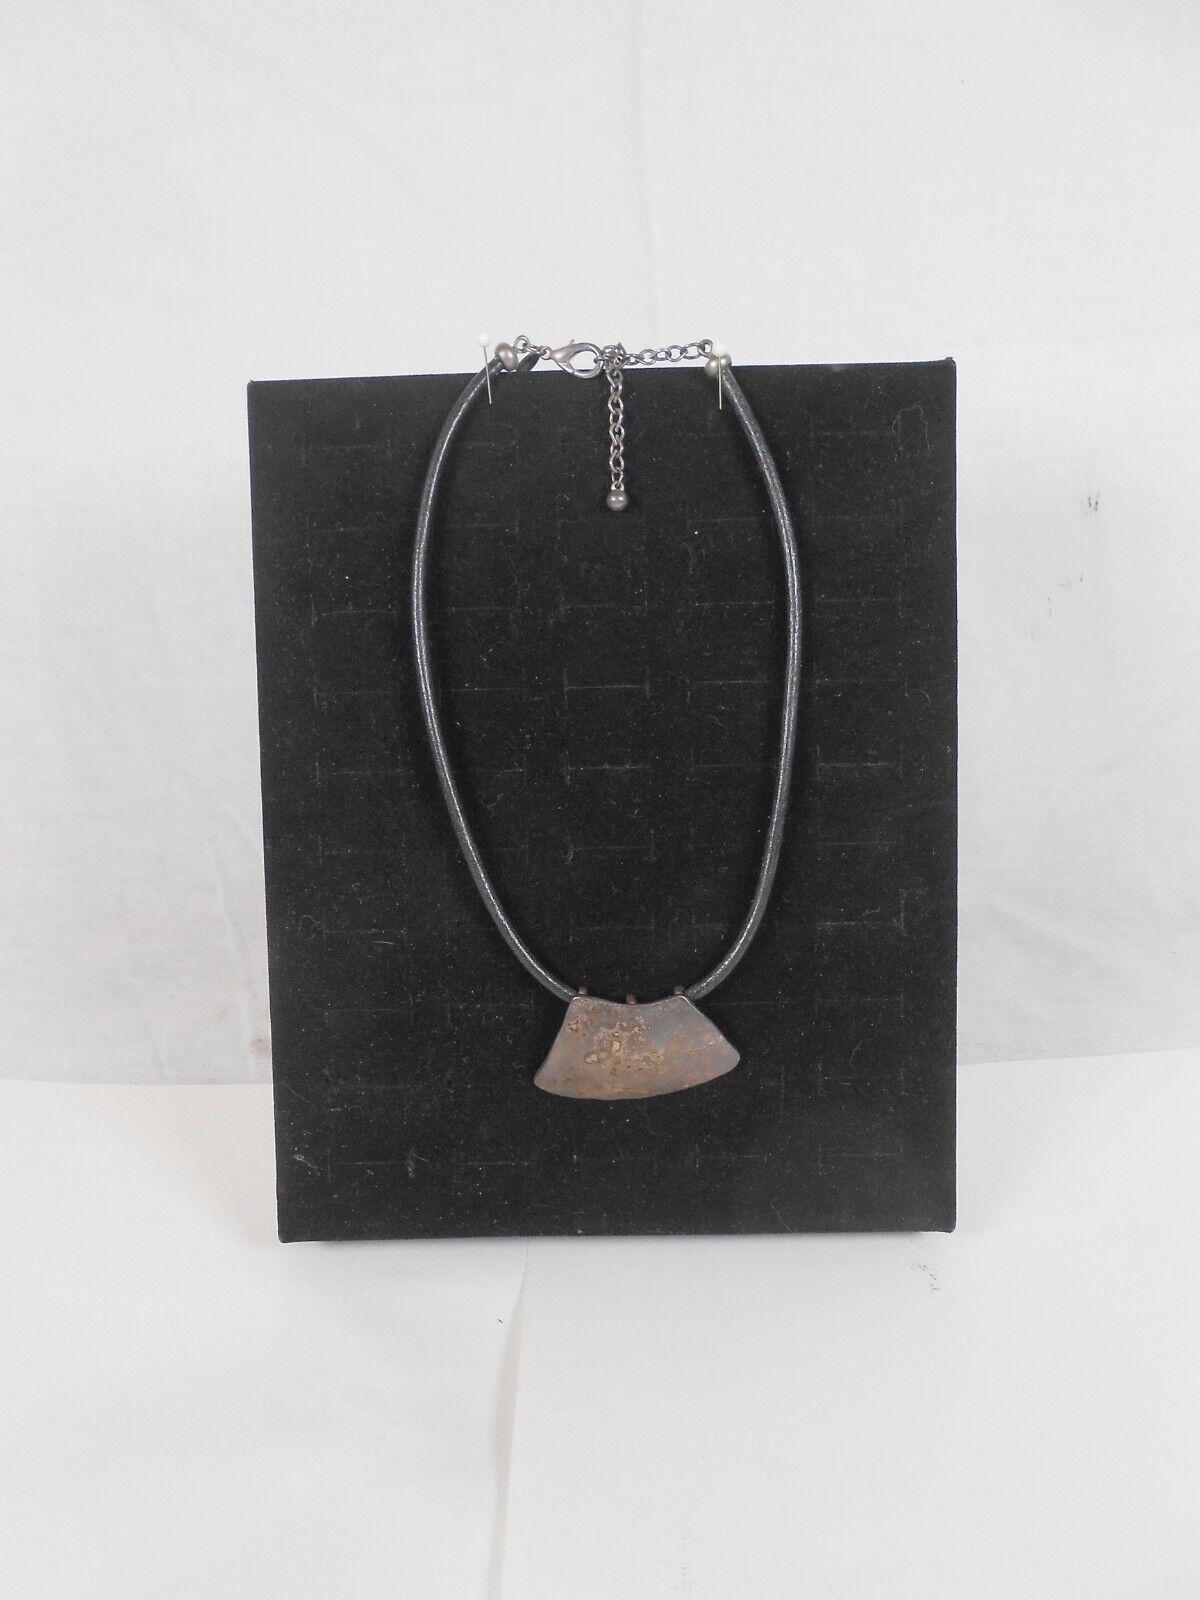 Chico's Choker Necklace with Leather with Hammered aged Metal Pendant - $8.60